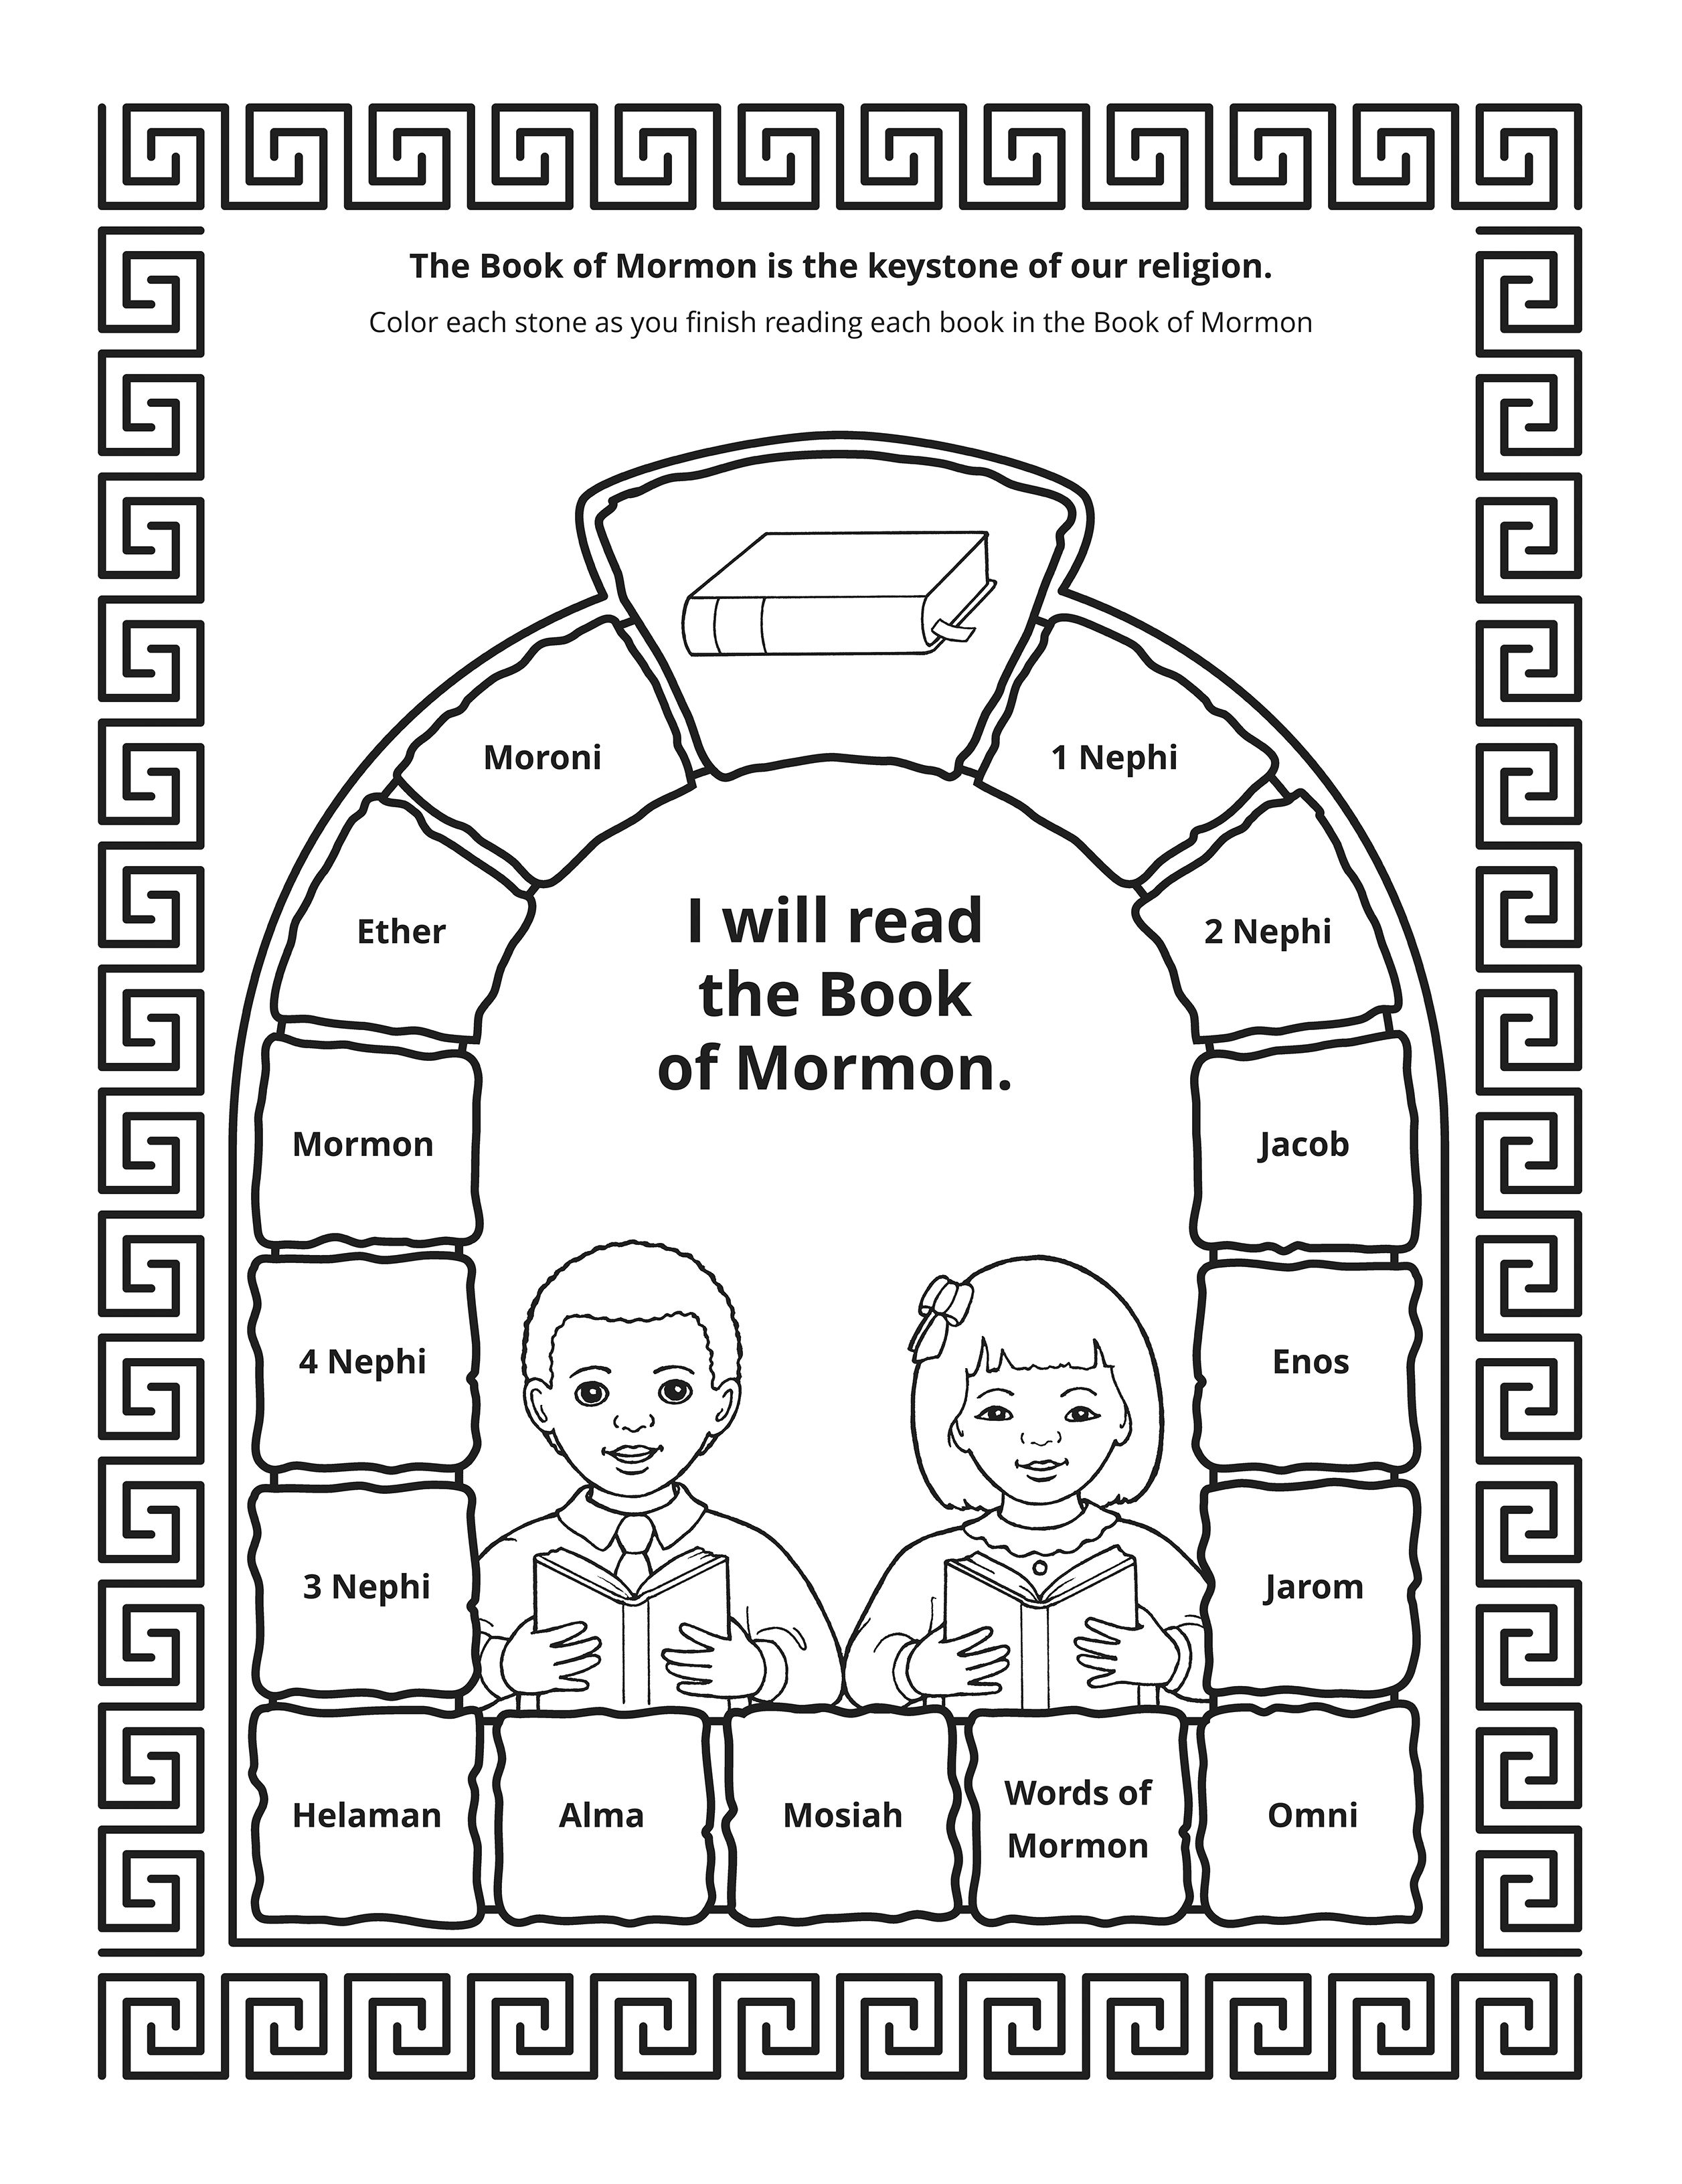 A line drawing showing that the Book of Mormon is the keystone of our religion.